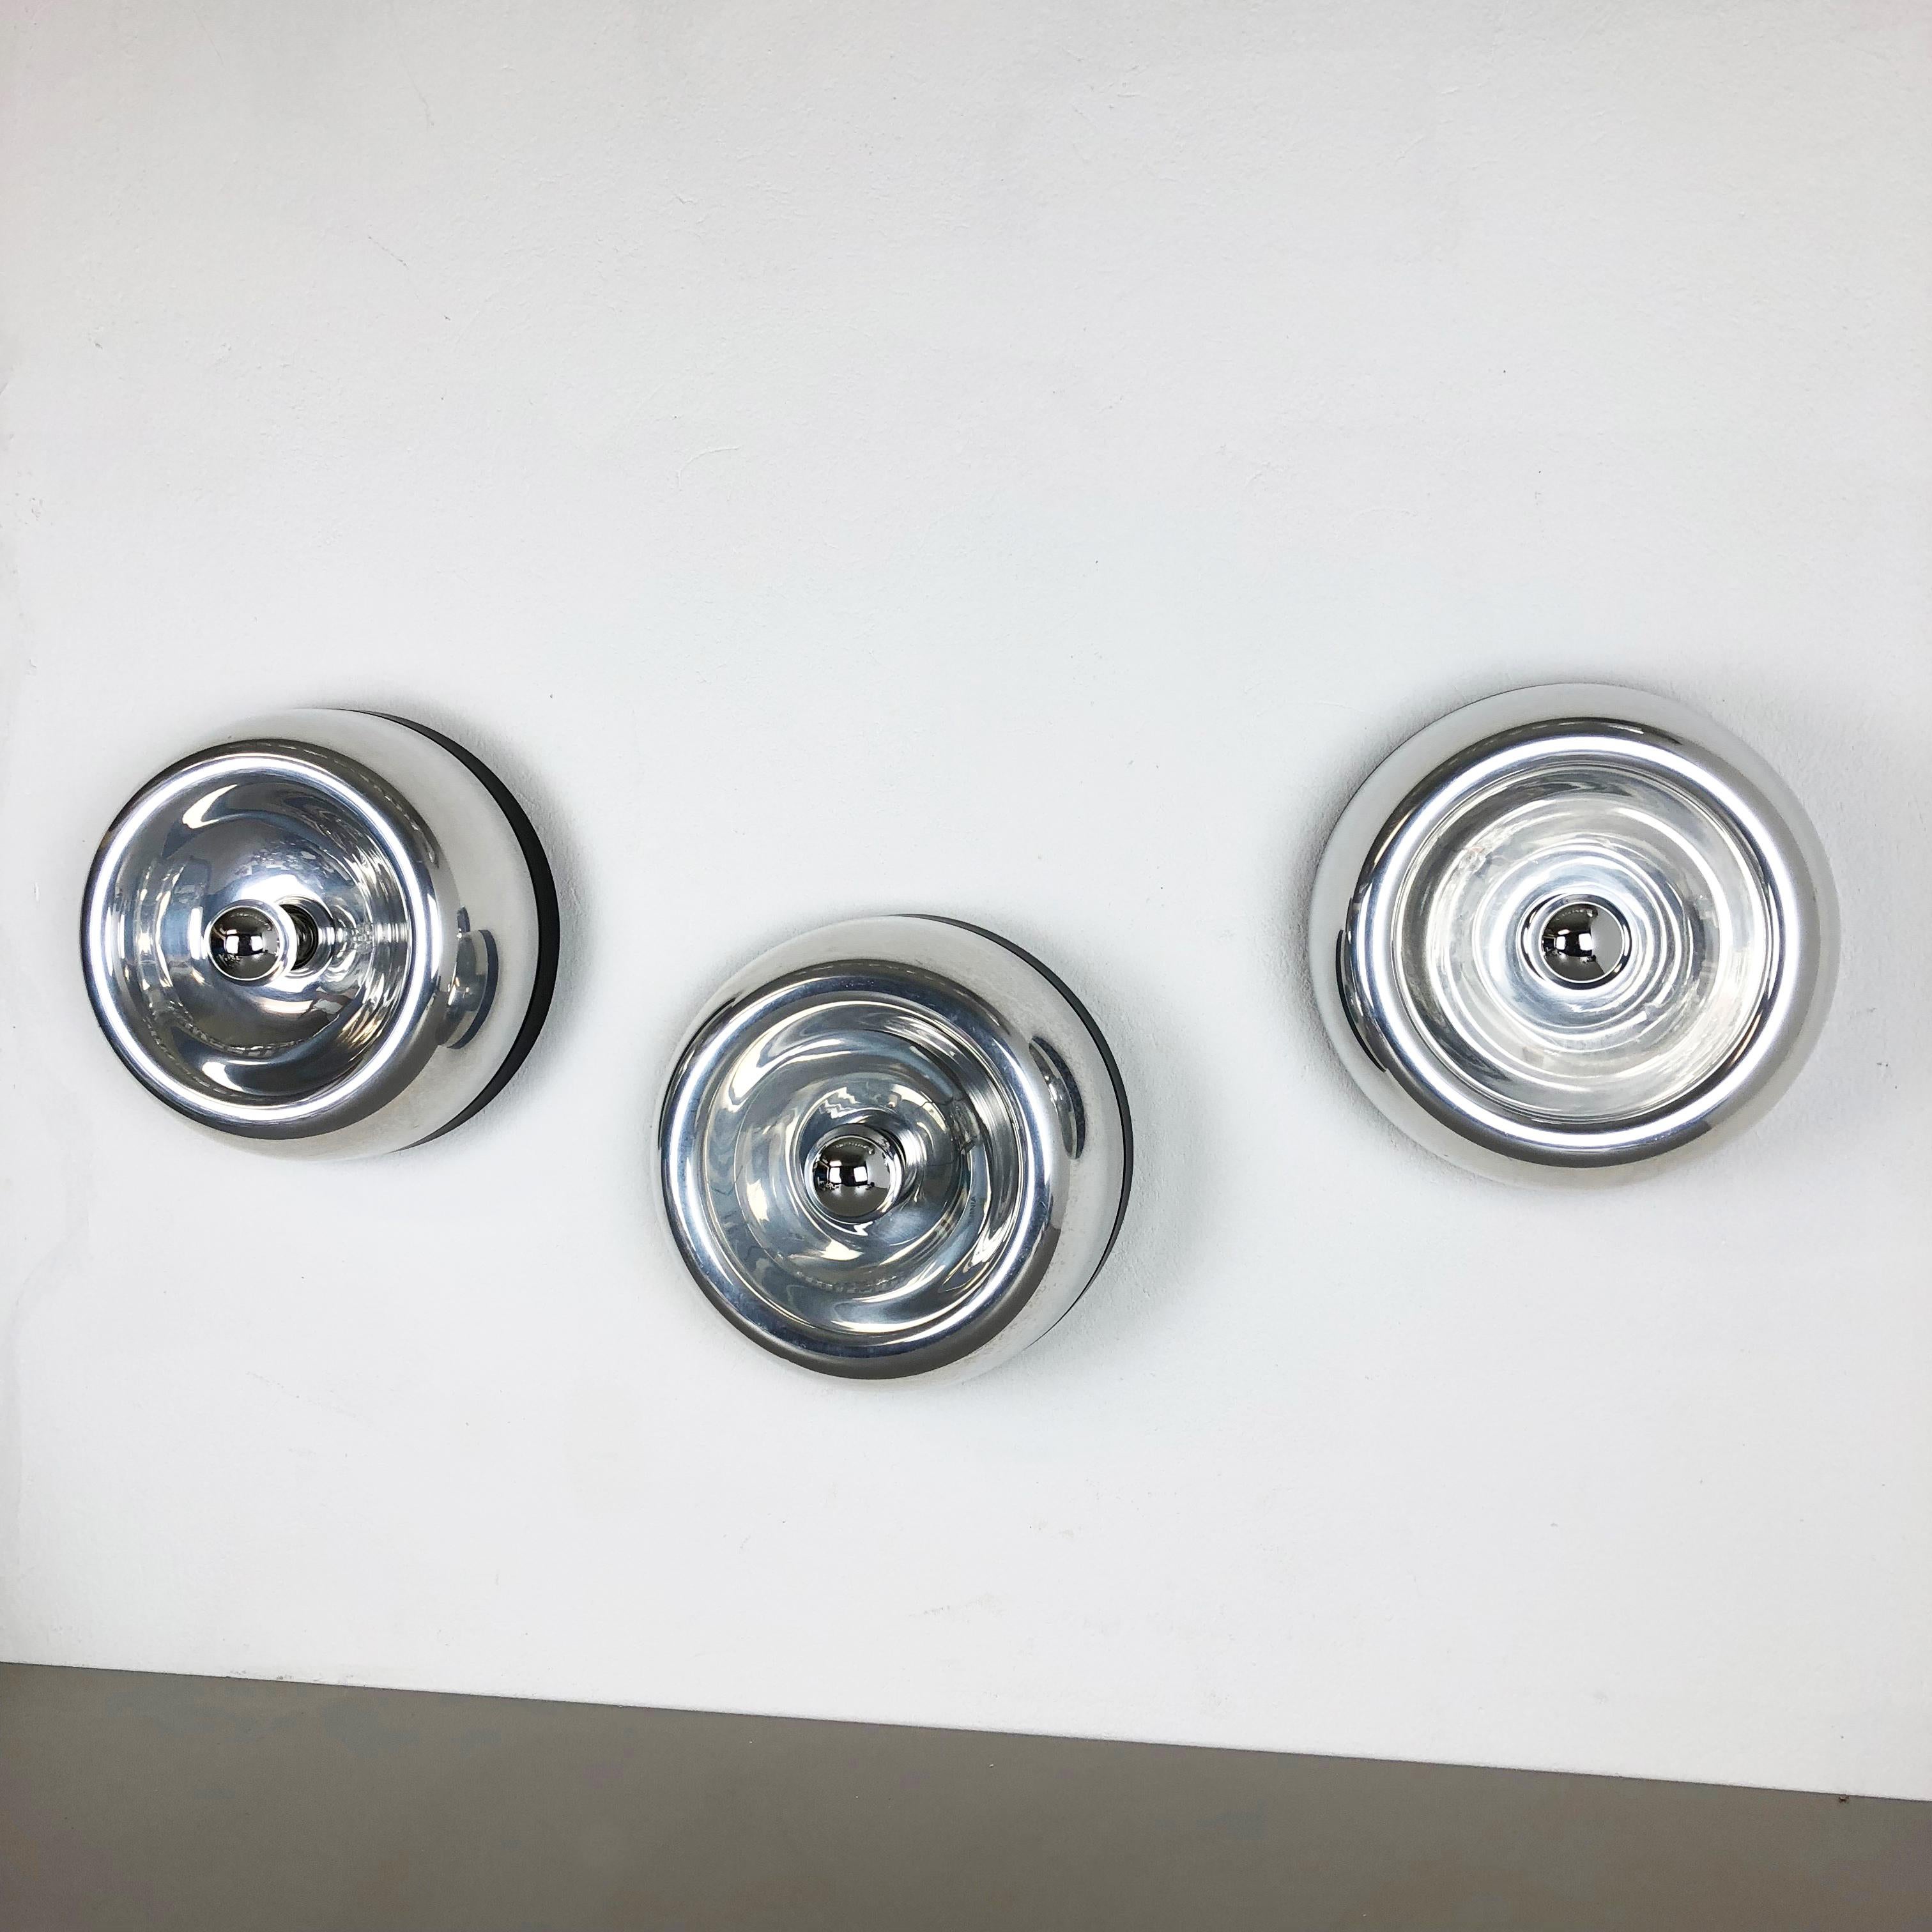 Article:

Wall light sconce set of 3.


Producer:

Cosack Lights



Origin:

Germany



Age:

1960s



Description:

Original 1960s modernist German wall Lights made of aluminum with chromed tone finish. This super rare wall